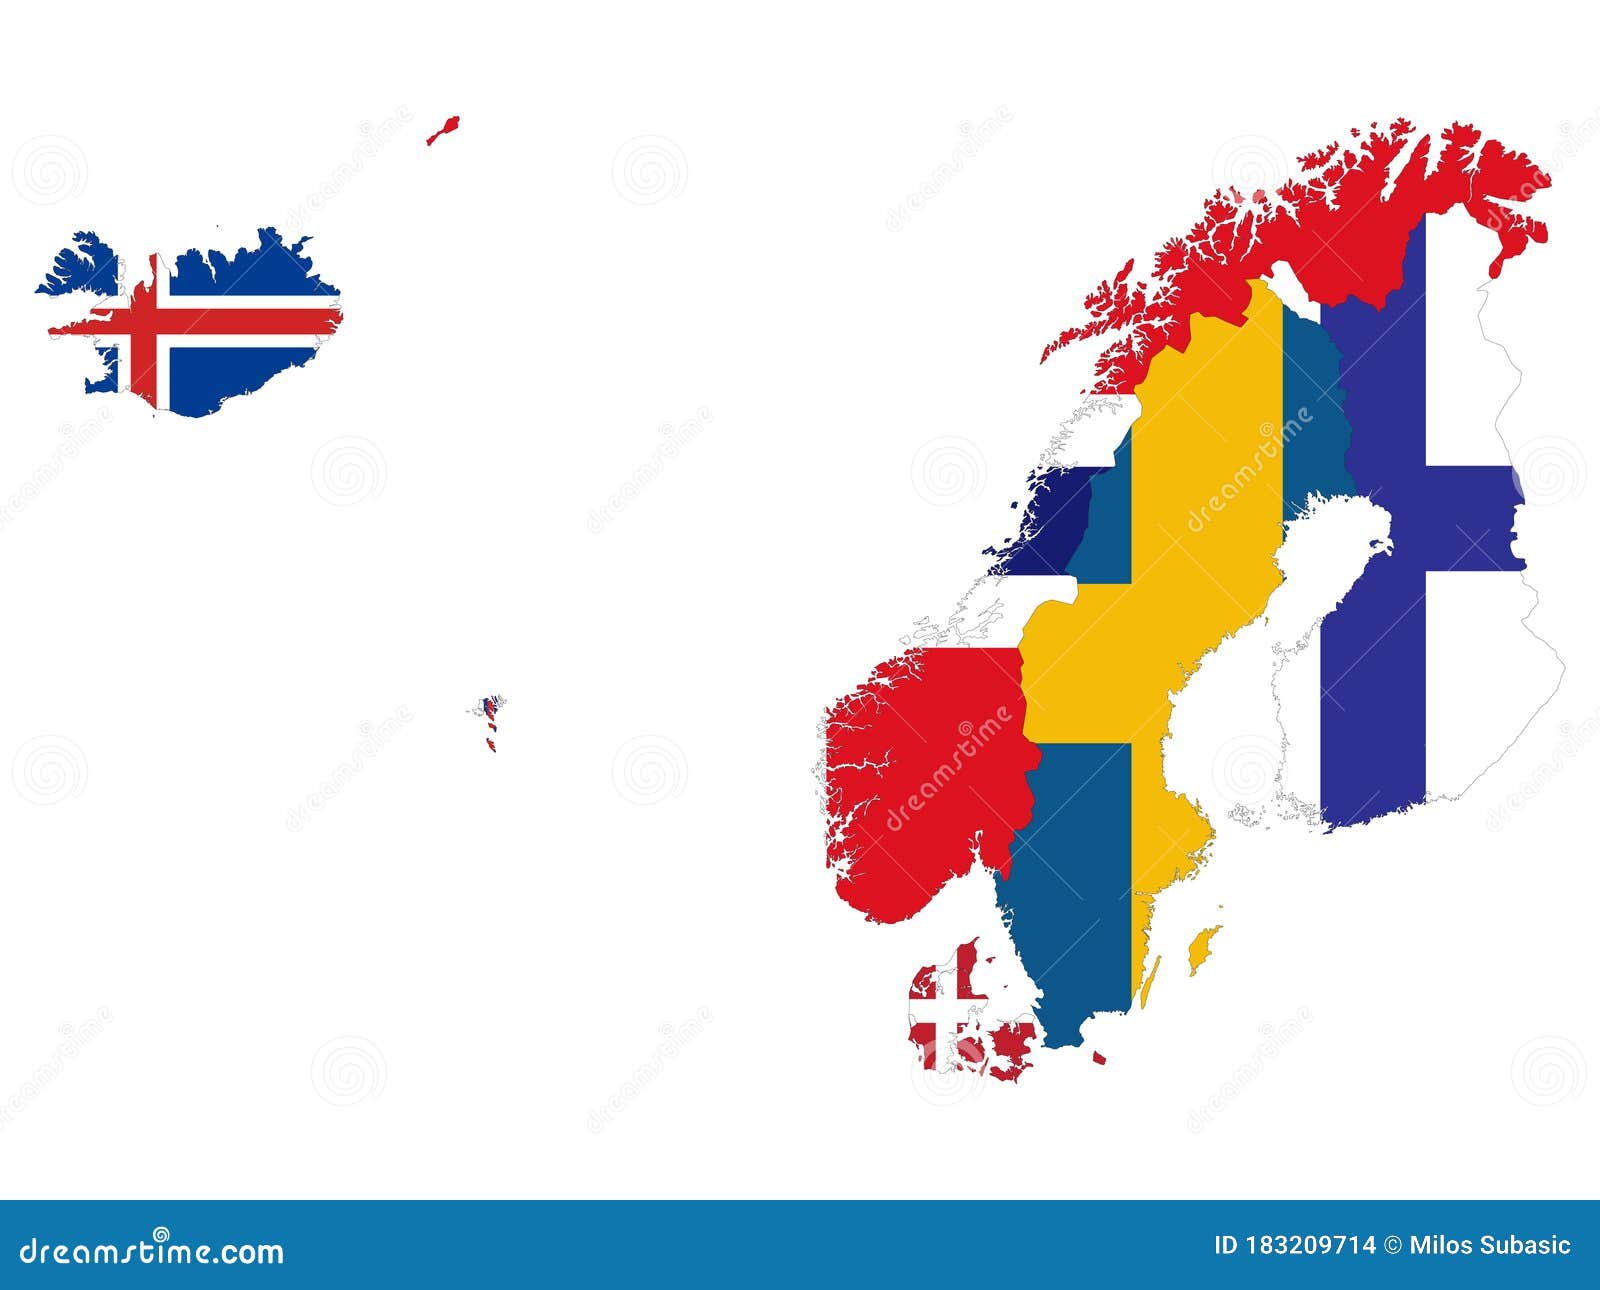 map of north europe-nordic countries with national flag